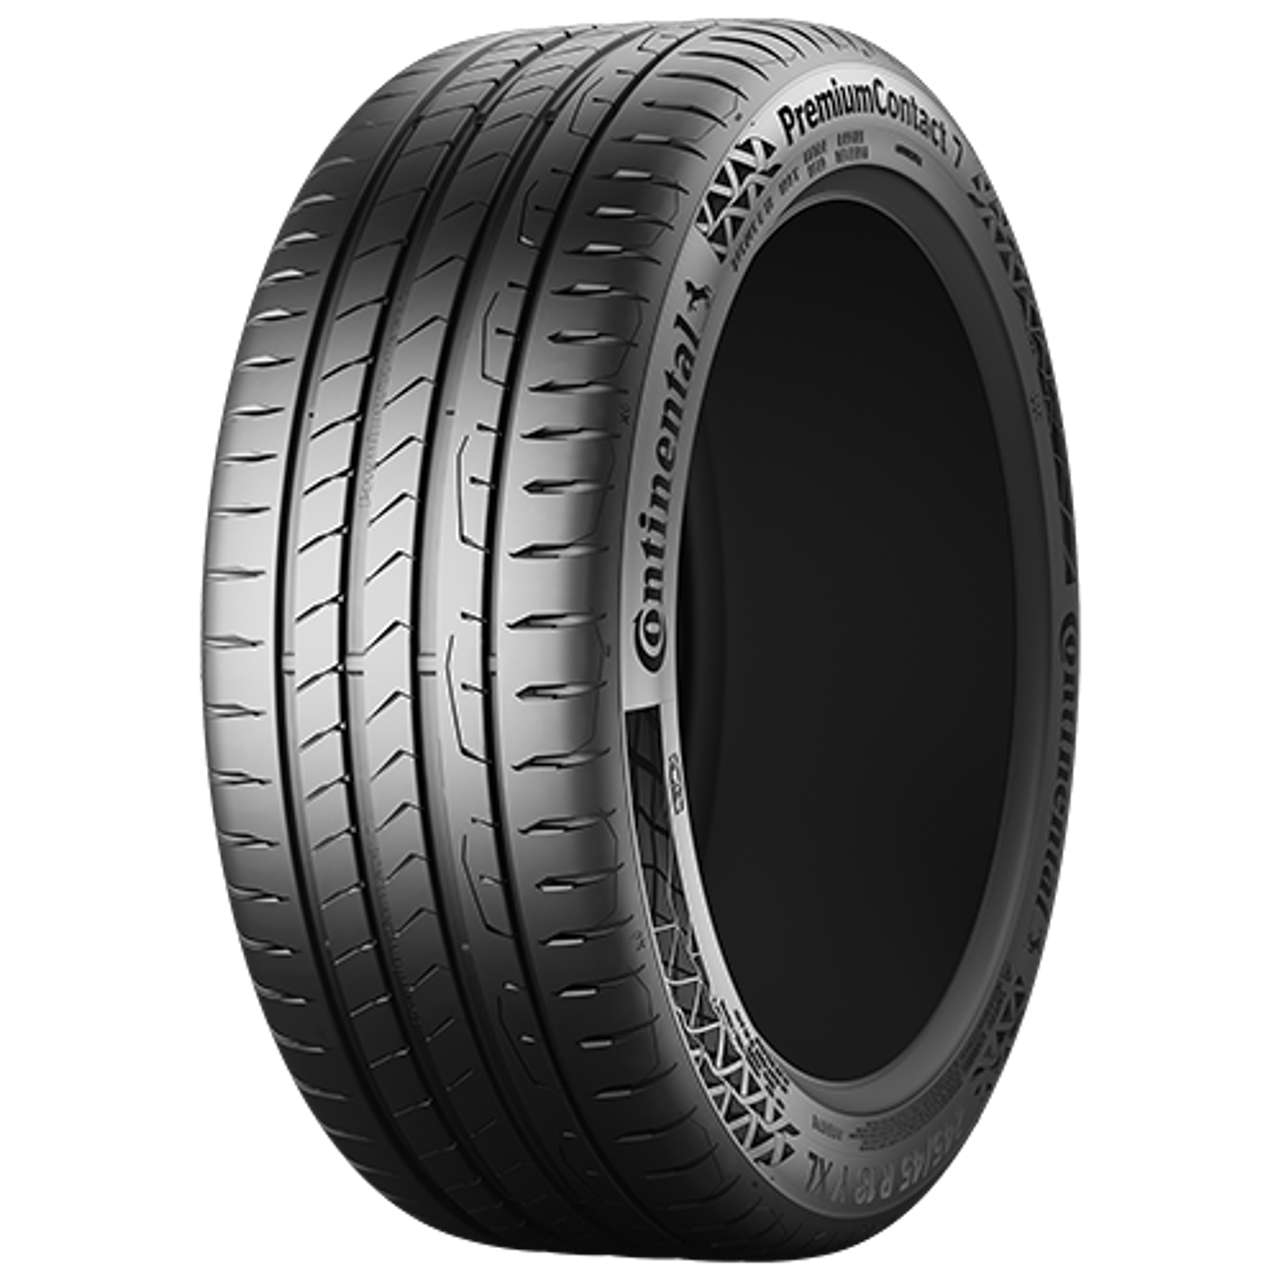 CONTINENTAL PREMIUMCONTACT 7 (EVc) 235/60R18 107V FR BSW